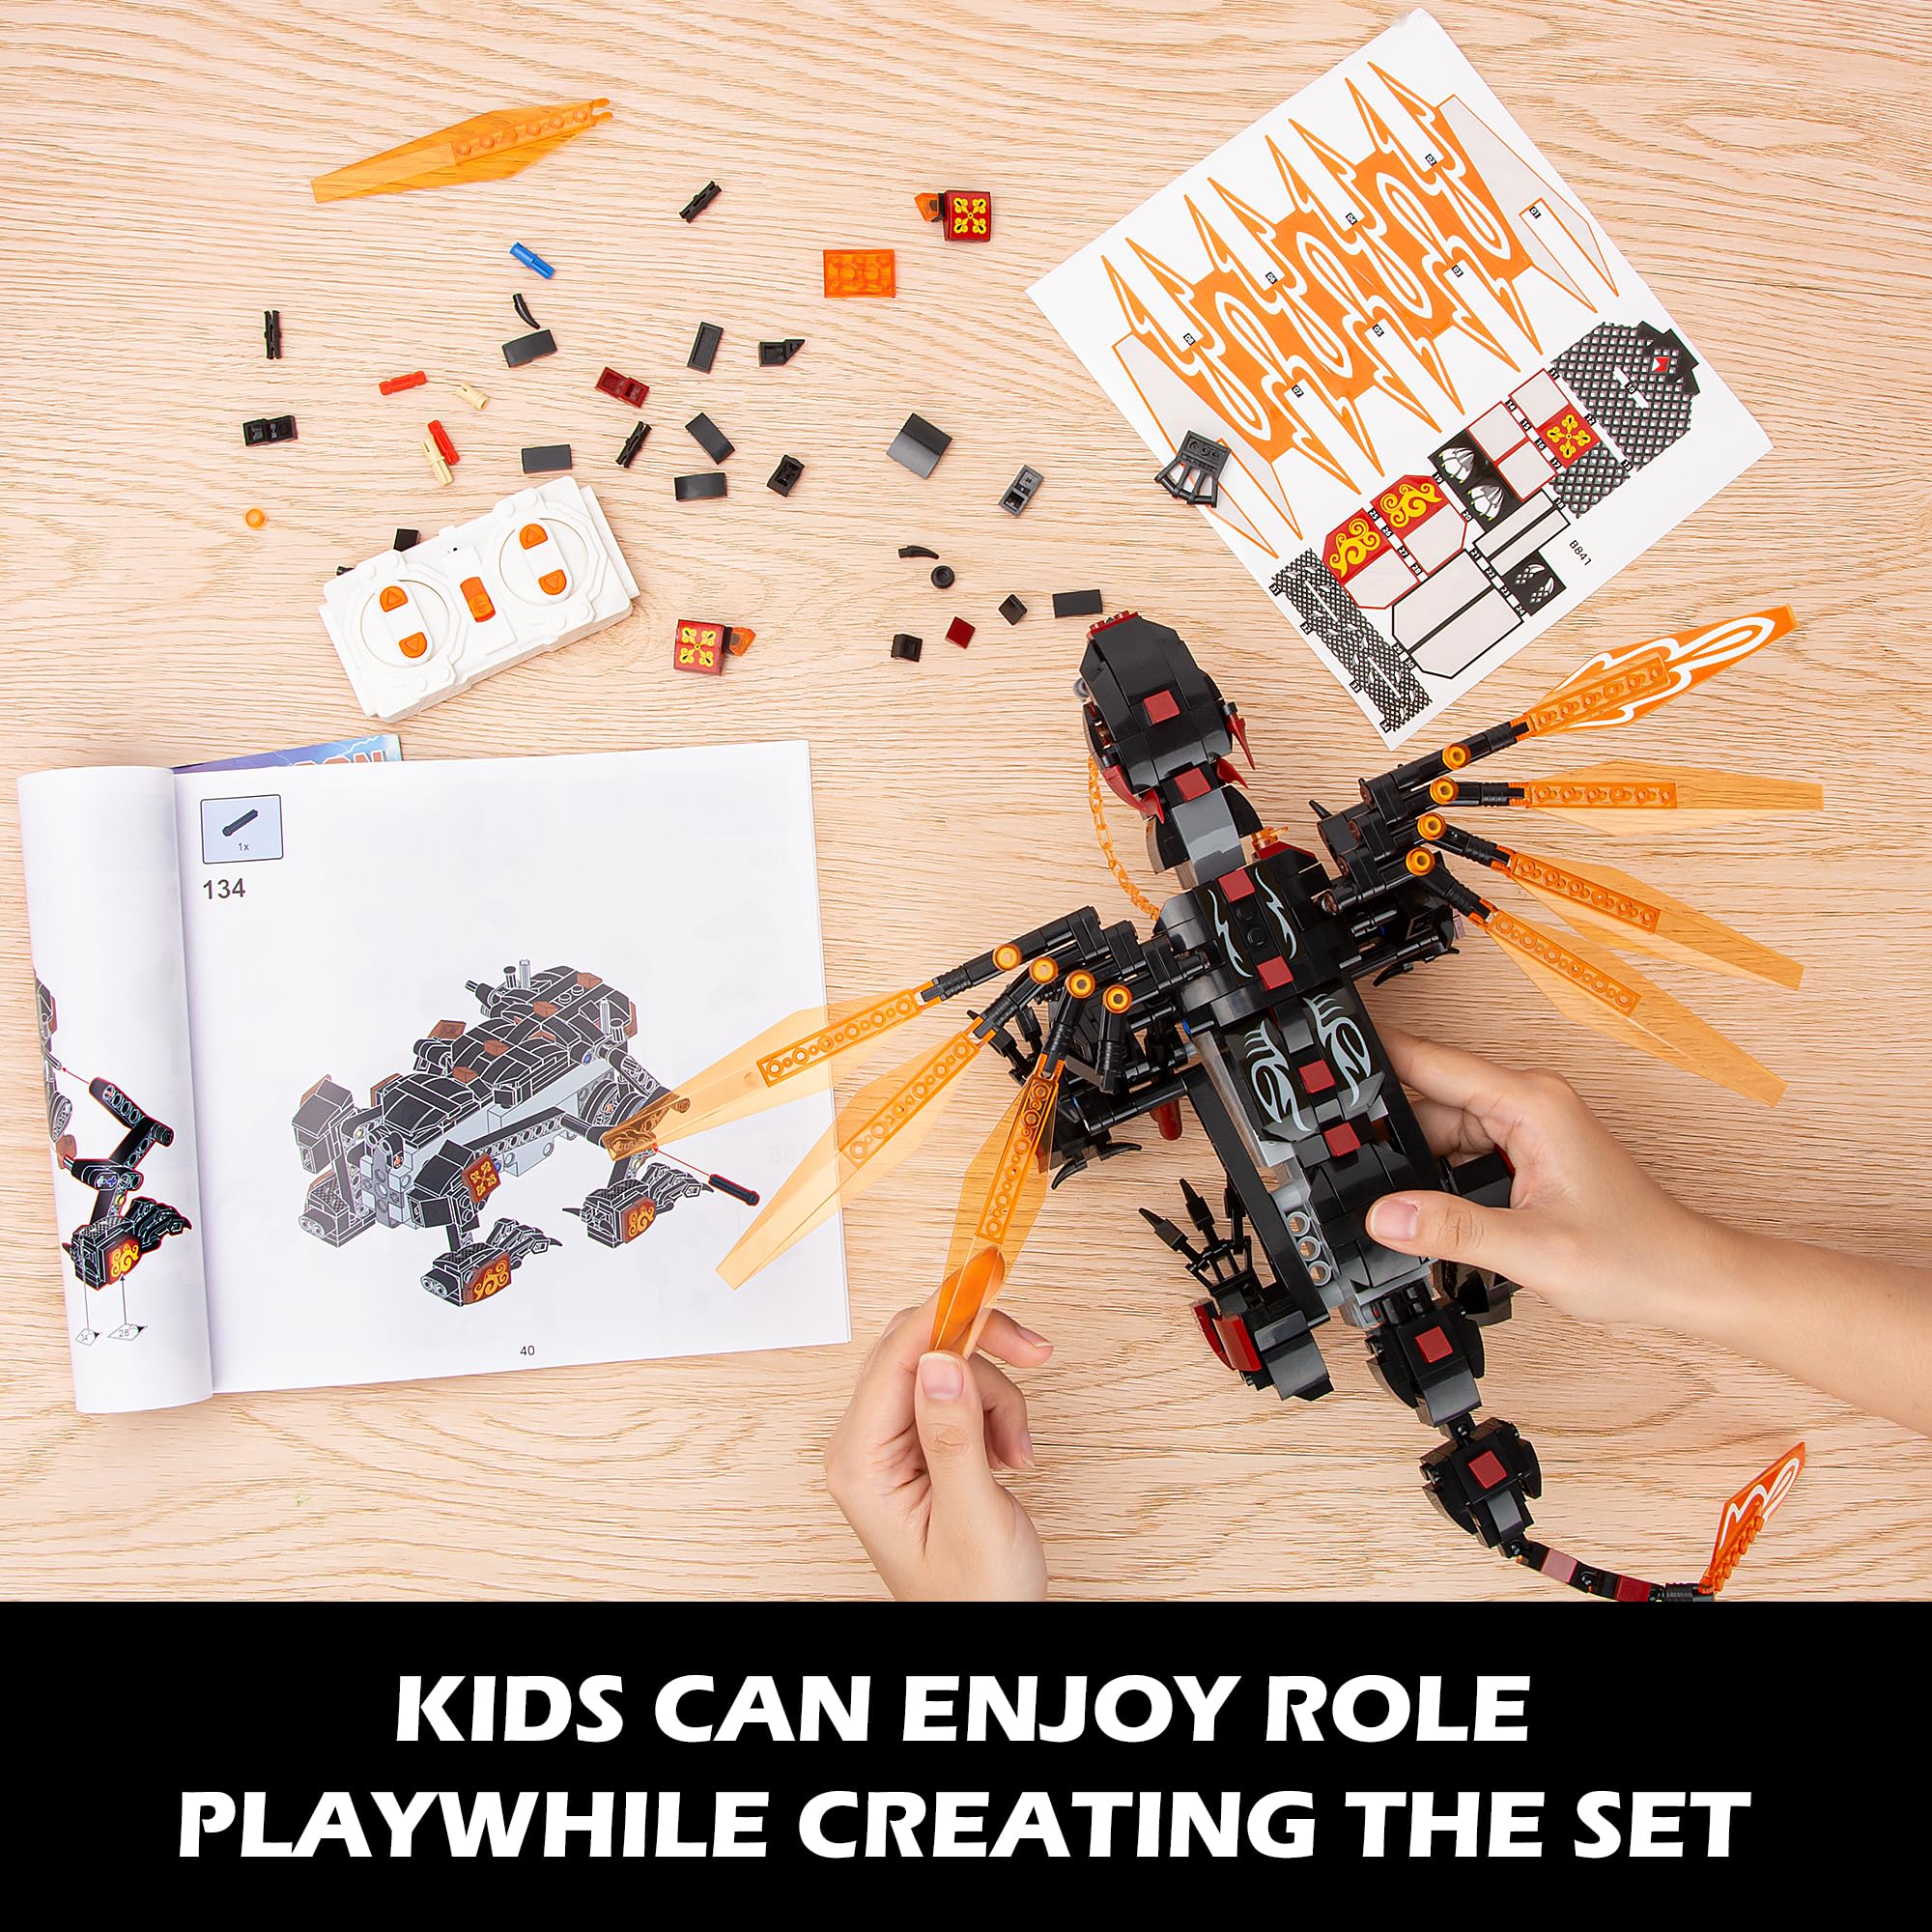 STEM Project Dragon Building Toys (521Pcs), Educational Birthday Gift Idea for Kids Boys Girls 8-12, Remote Control & App Programmable Building Kit